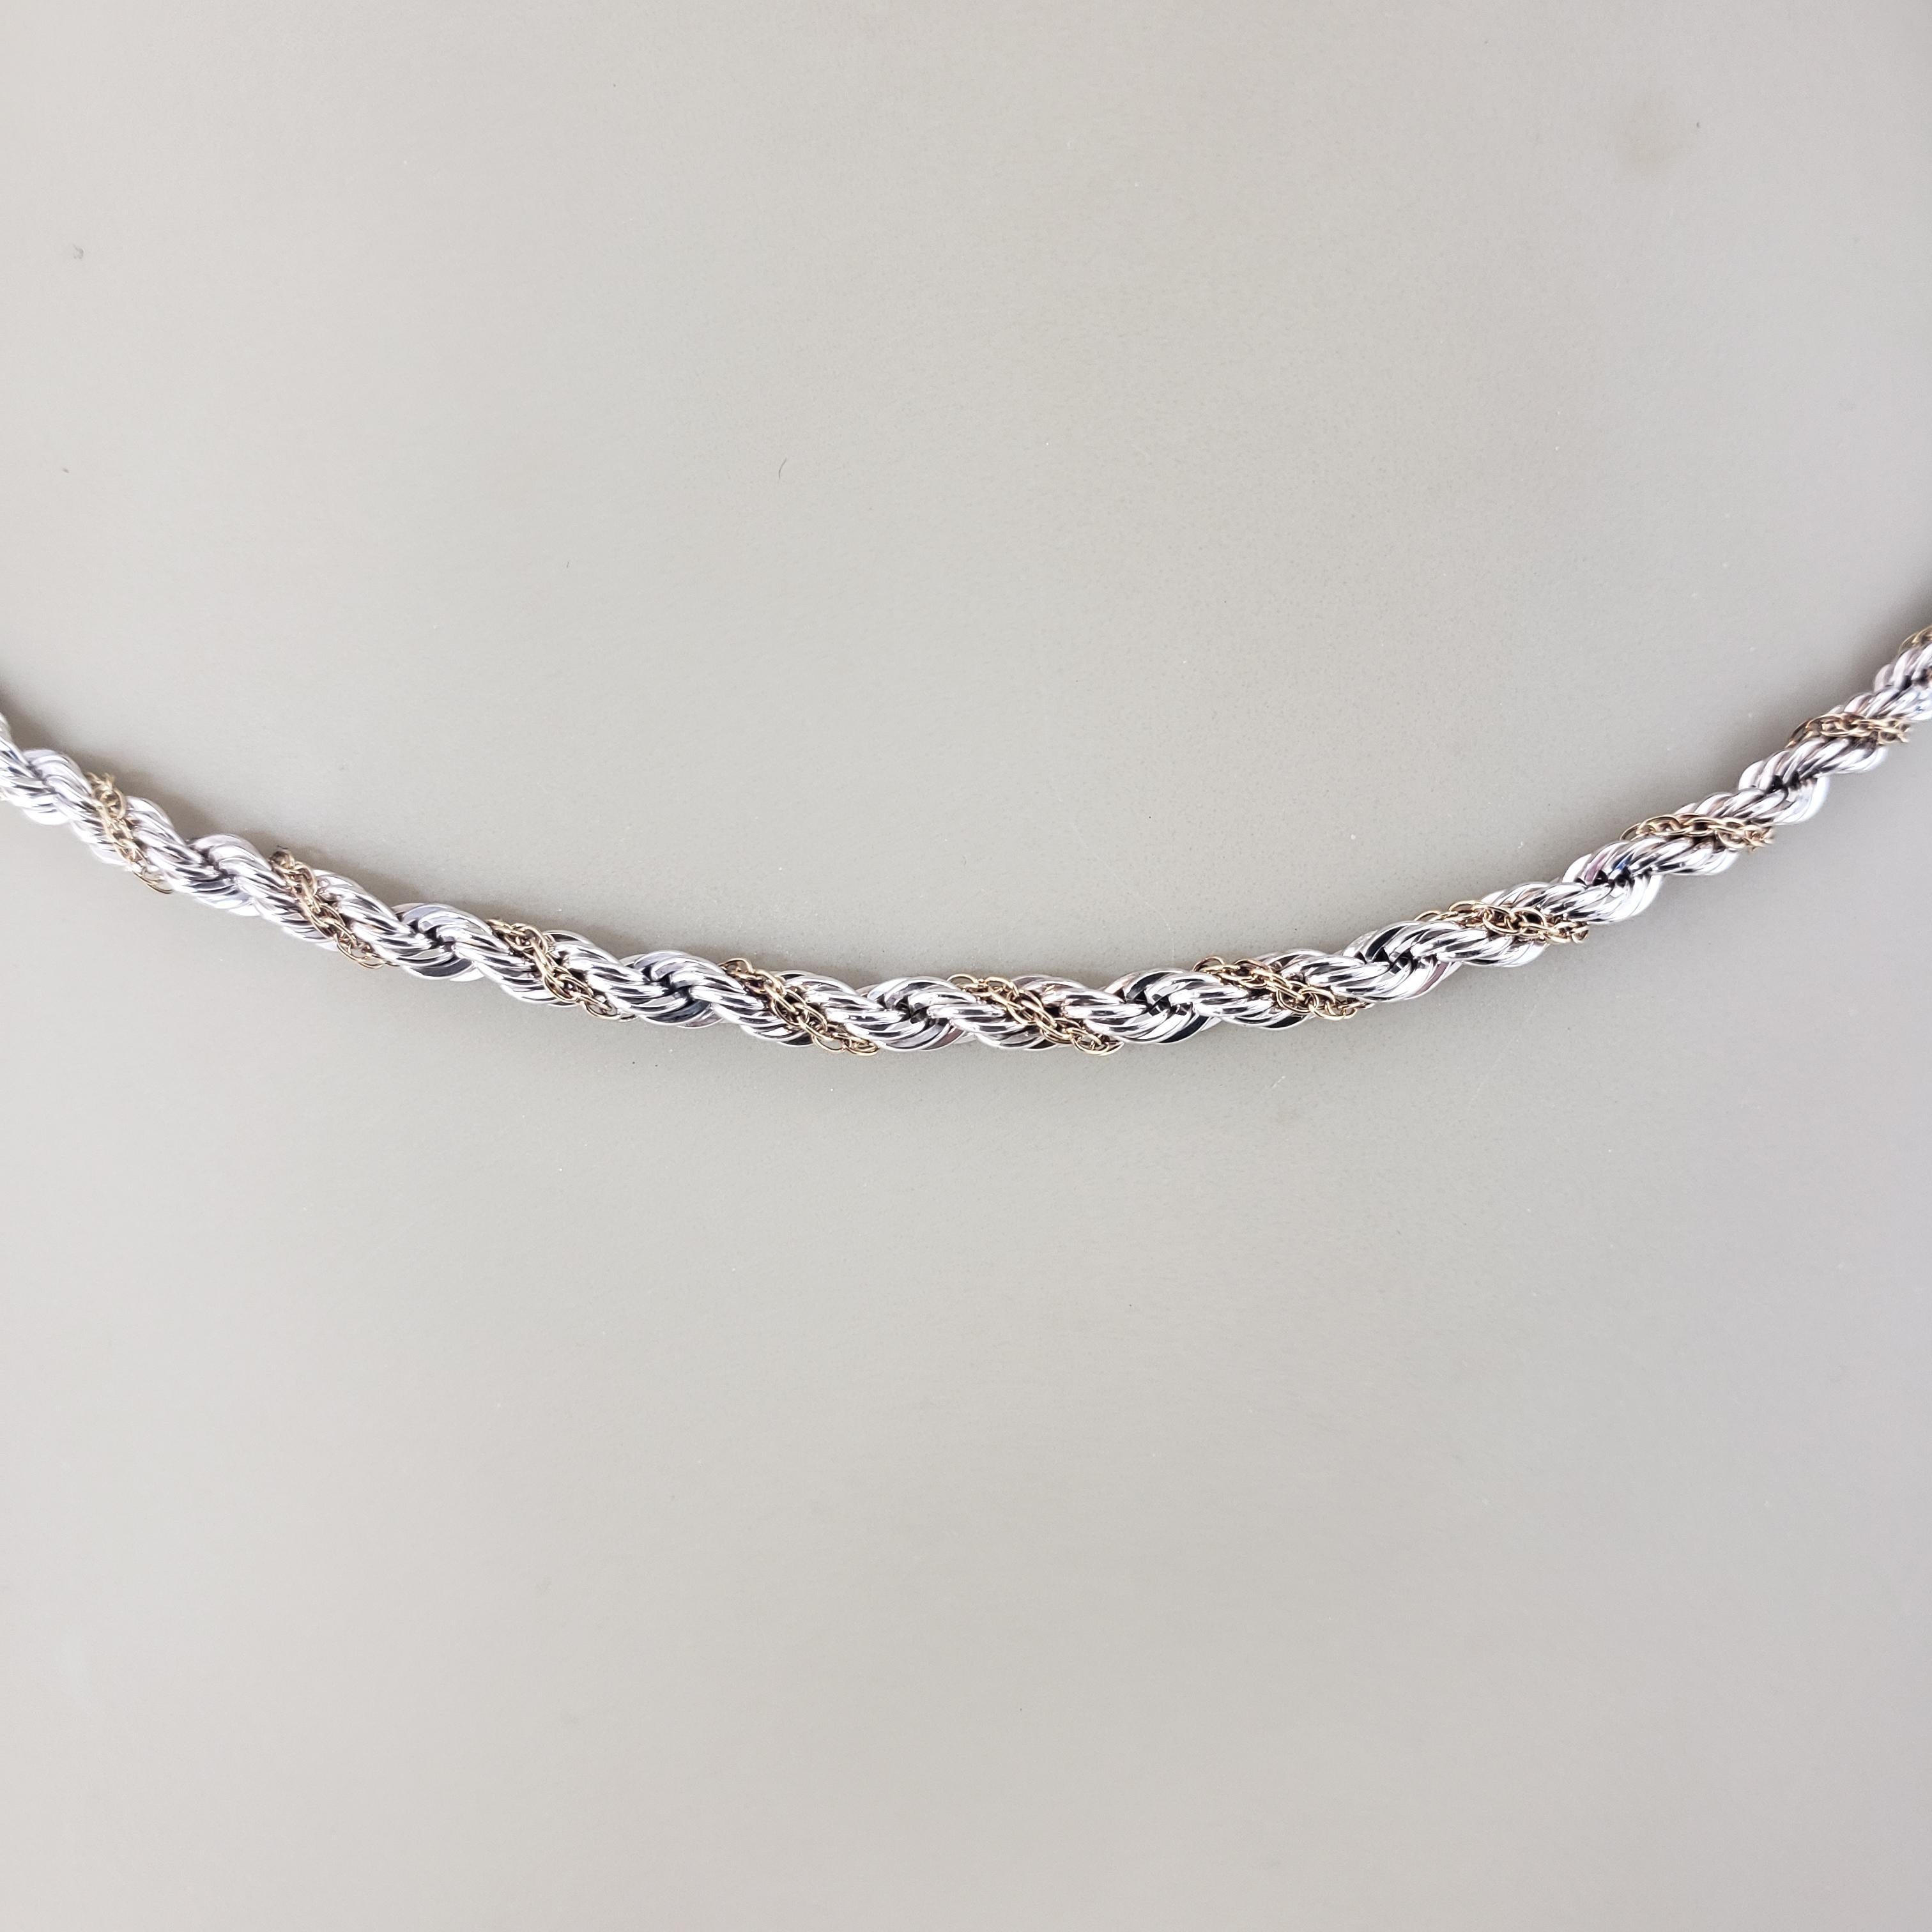 Tiffany & Co. Sterling Silver 18K Yellow Gold Twisted Rope Necklace #16849 4